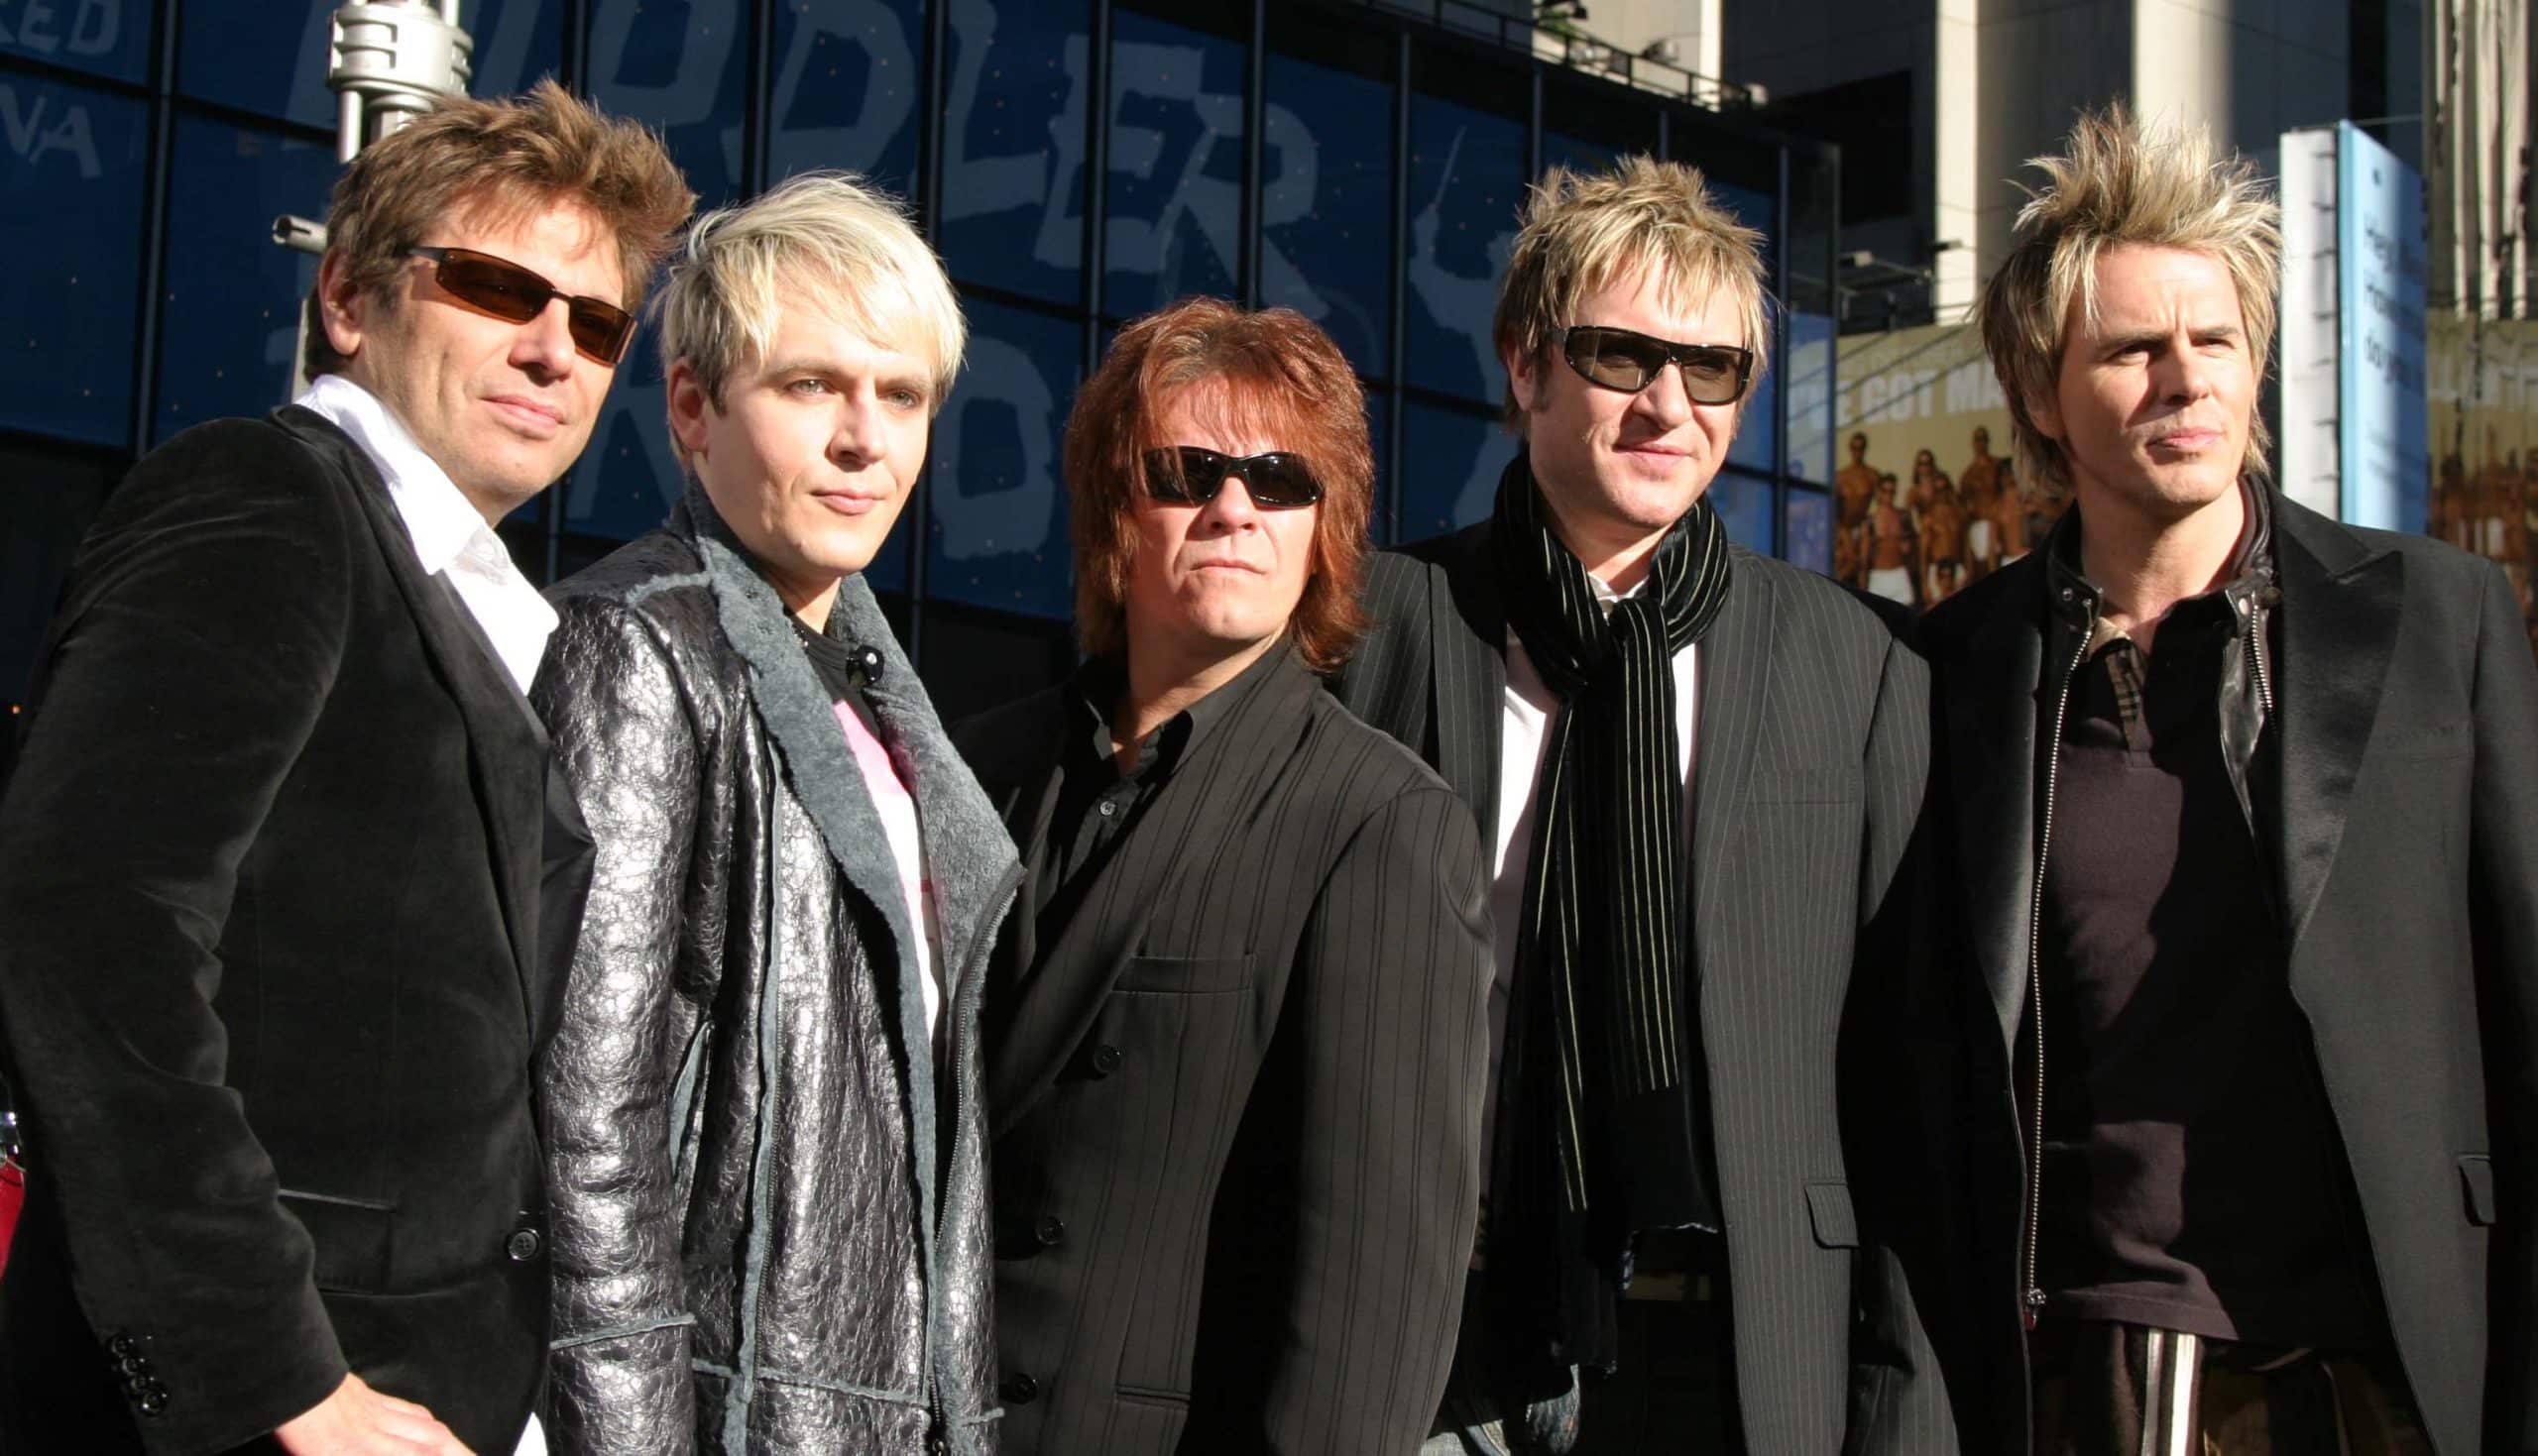 NYC 10/12/04 Bandmembers of DURAN DURAN: Simon Le Bon, Nick Rhodes, John Taylor, Andy Taylor and Roger Taylor performing on Good Morning America in Times Square